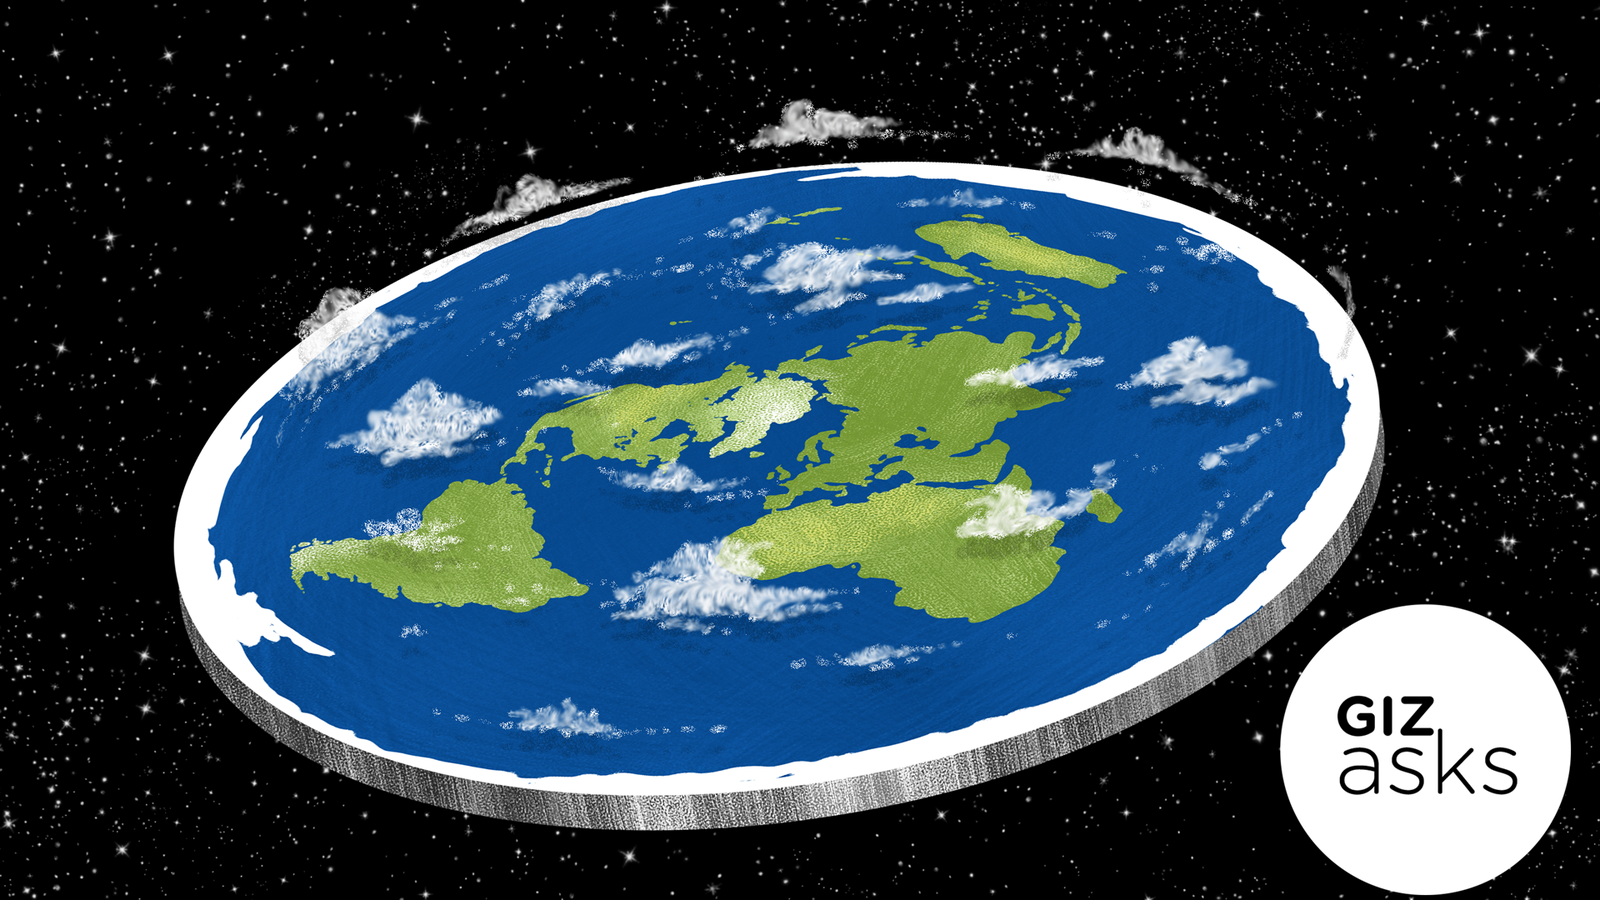 is the earth flat or round